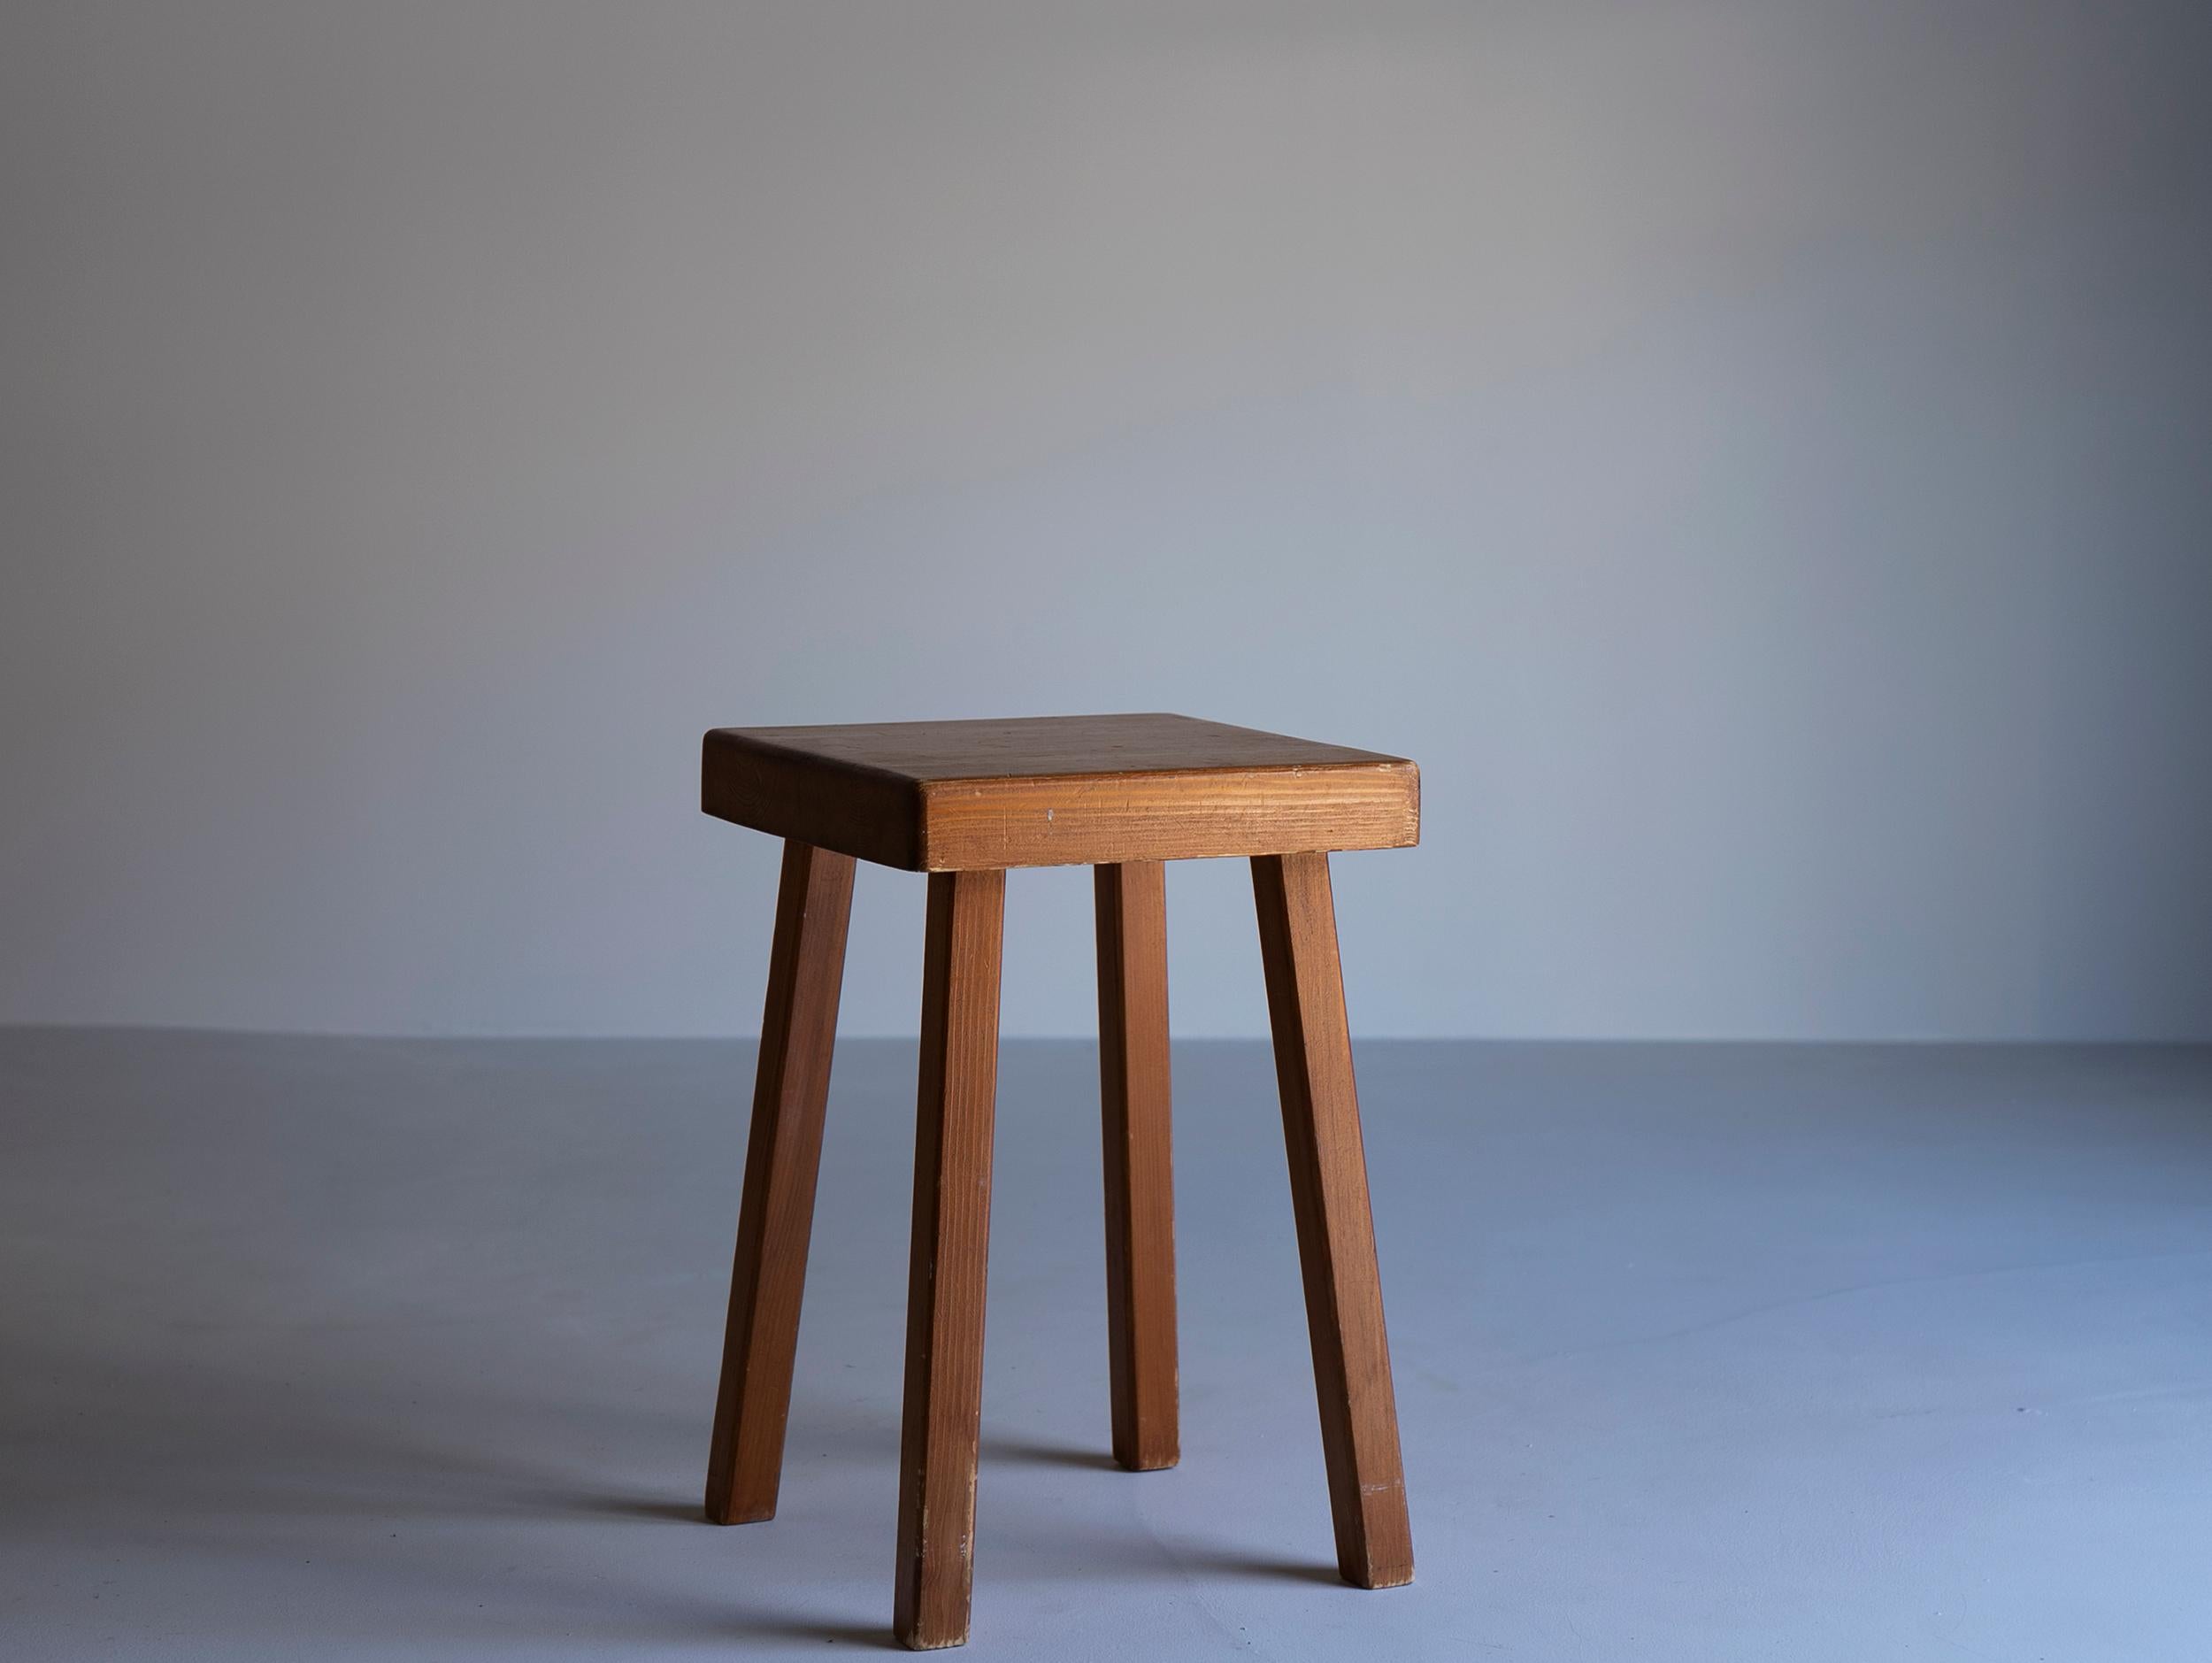 Stool designed by Charlotte Perriand for the Les Arcs ski resort, circa 1960.
This stool was used in Arc 1800.
The stool is in original condition but shows some wear and tear due to age and use.

Country / France
Date / 1960s
Material / Wood